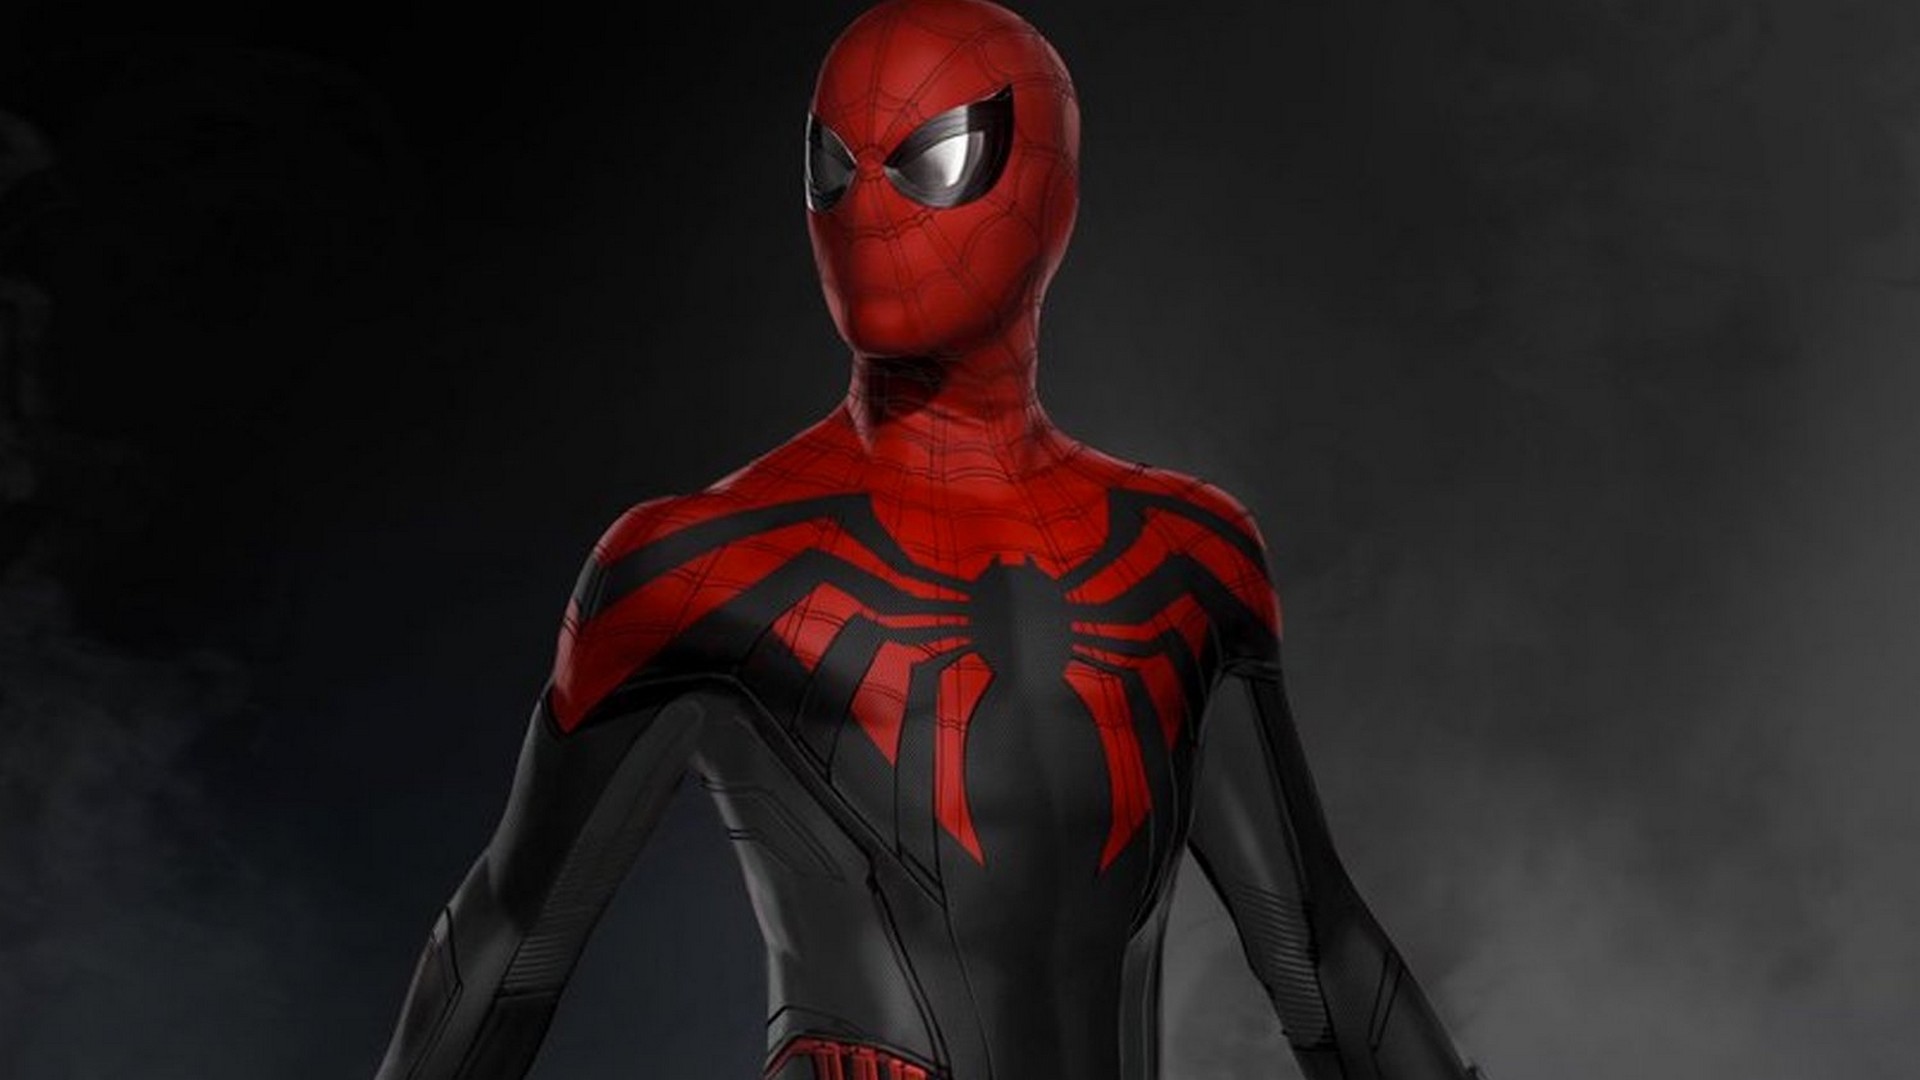 Spider-Man Far From Home Wallpaper HD with high-resolution 1920x1080 pixel. You can use this poster wallpaper for your Desktop Computers, Mac Screensavers, Windows Backgrounds, iPhone Wallpapers, Tablet or Android Lock screen and another Mobile device